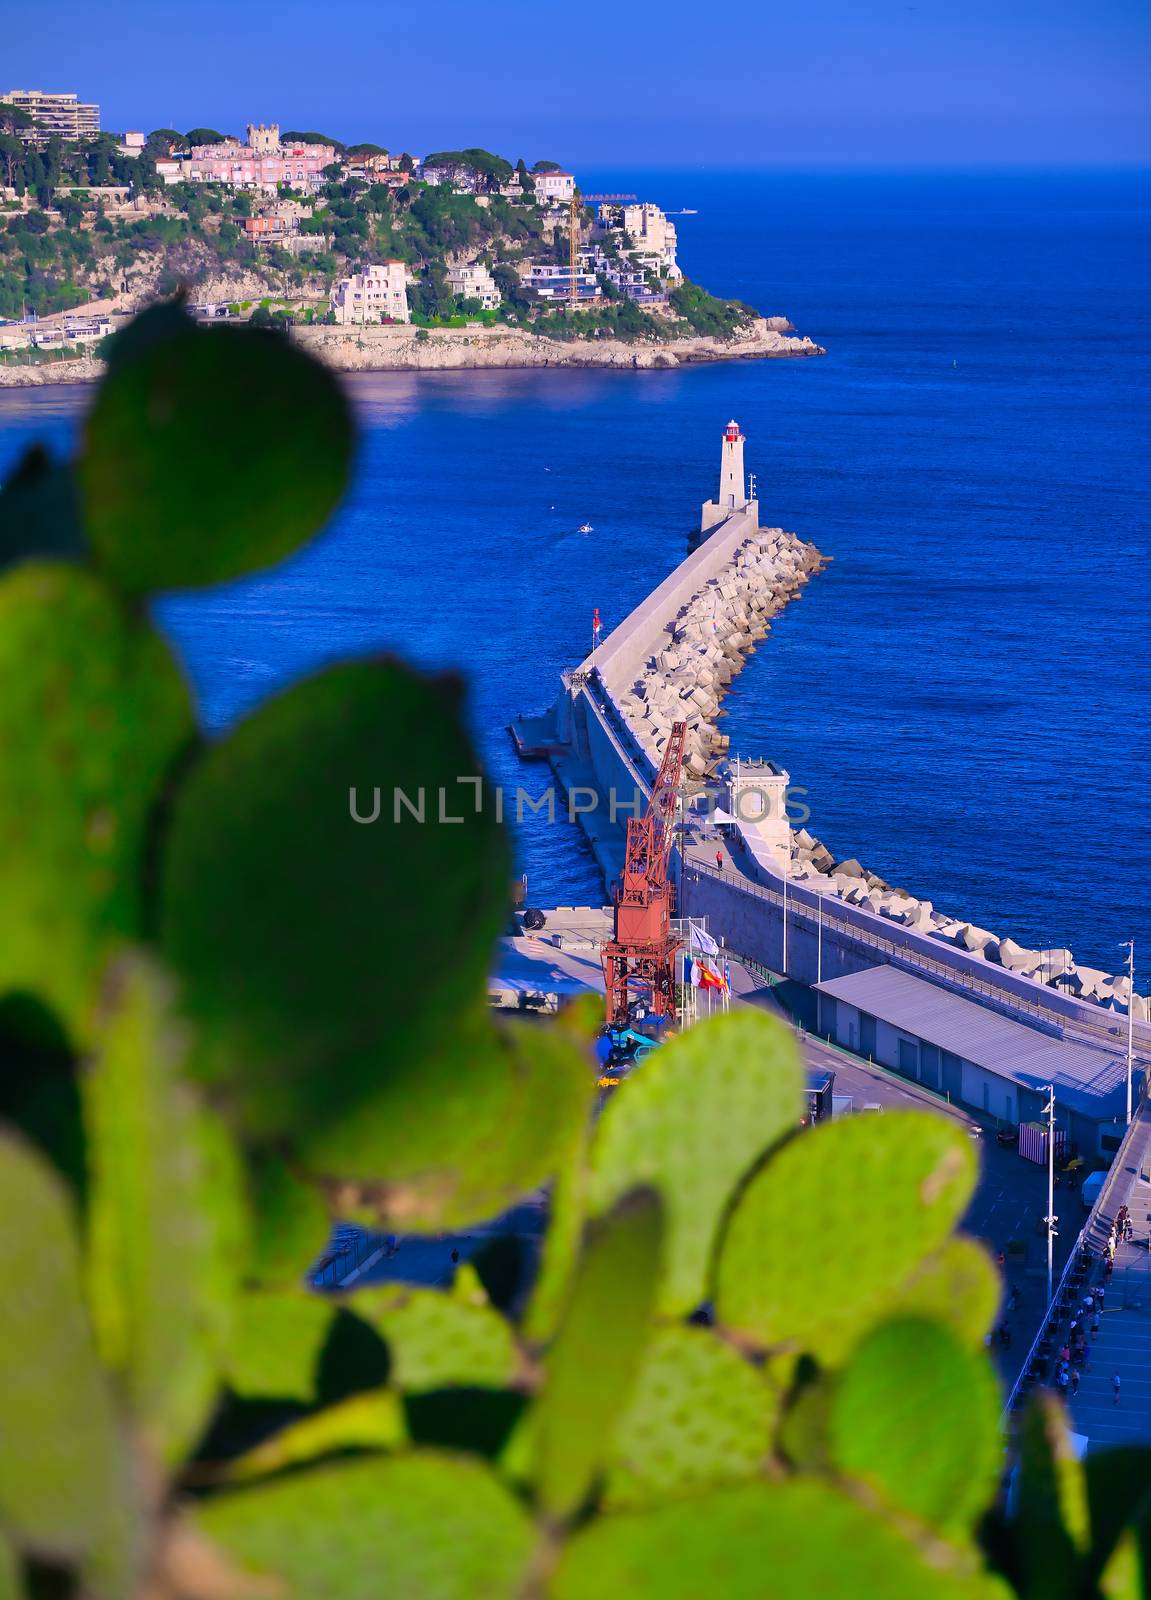 Lighthouse at the Port of Nice, France by jbyard22